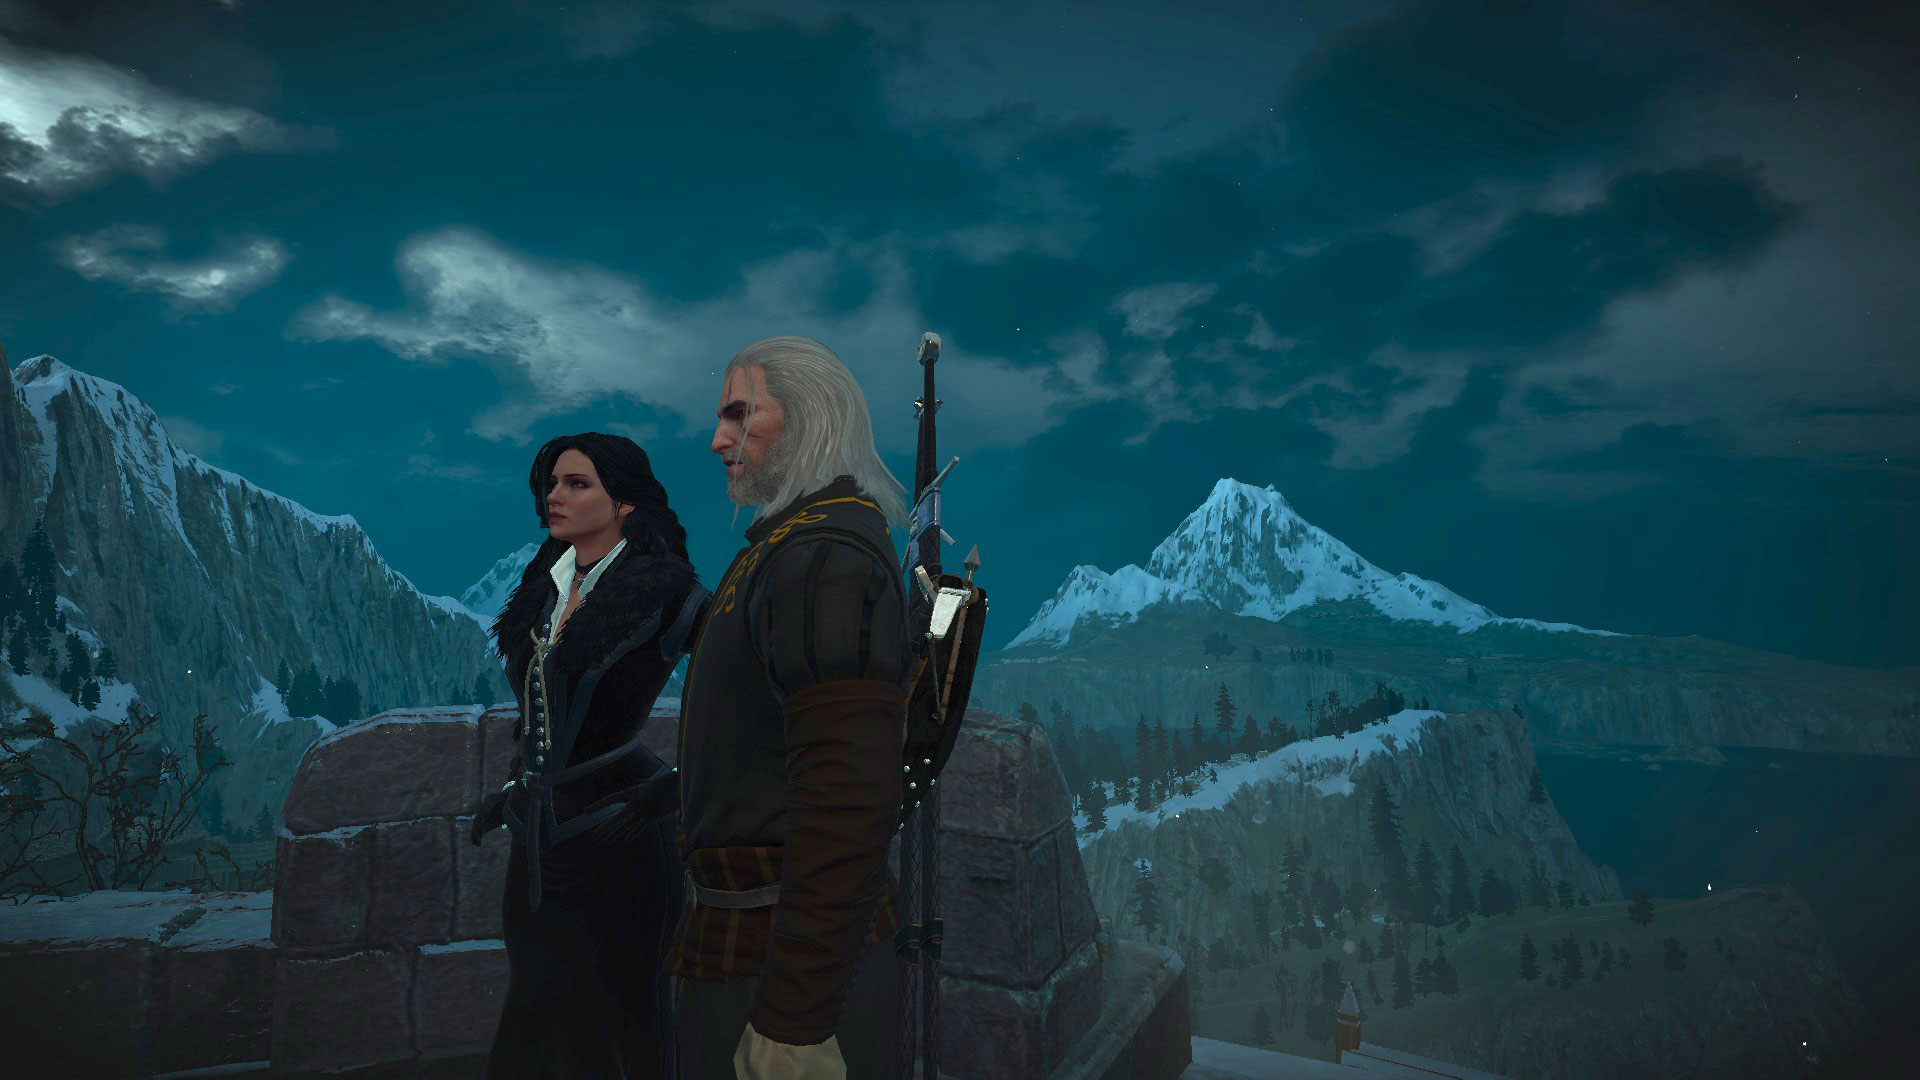 Yennefer And Geralt In The Mountains